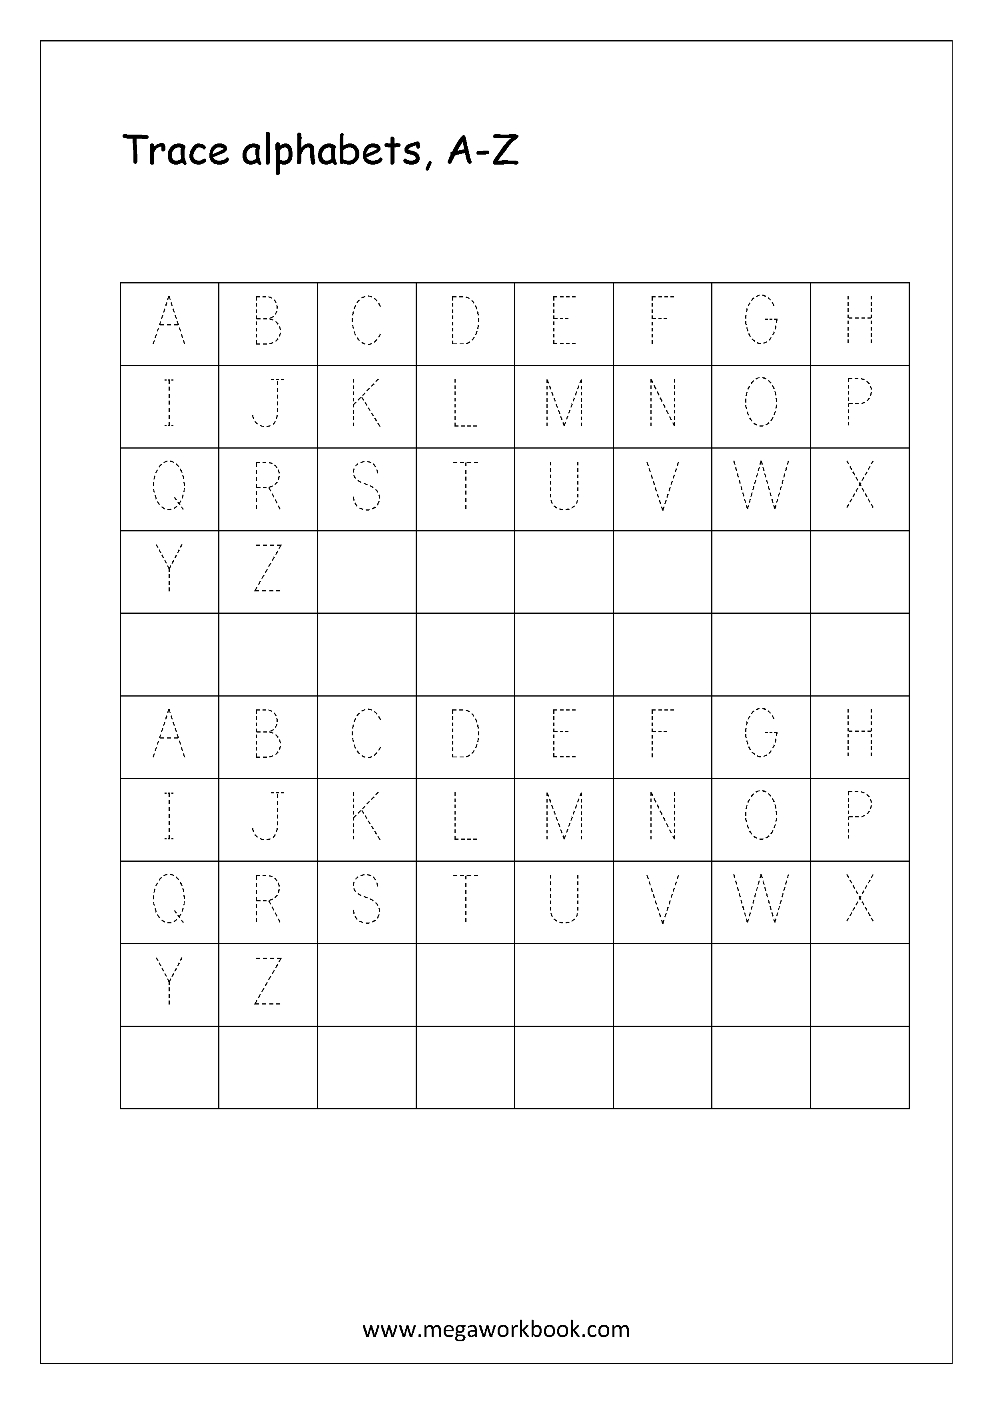 English Worksheet - Alphabet Tracing - Capital Letters pertaining to Alphabet Handwriting Worksheets A To Z Printable